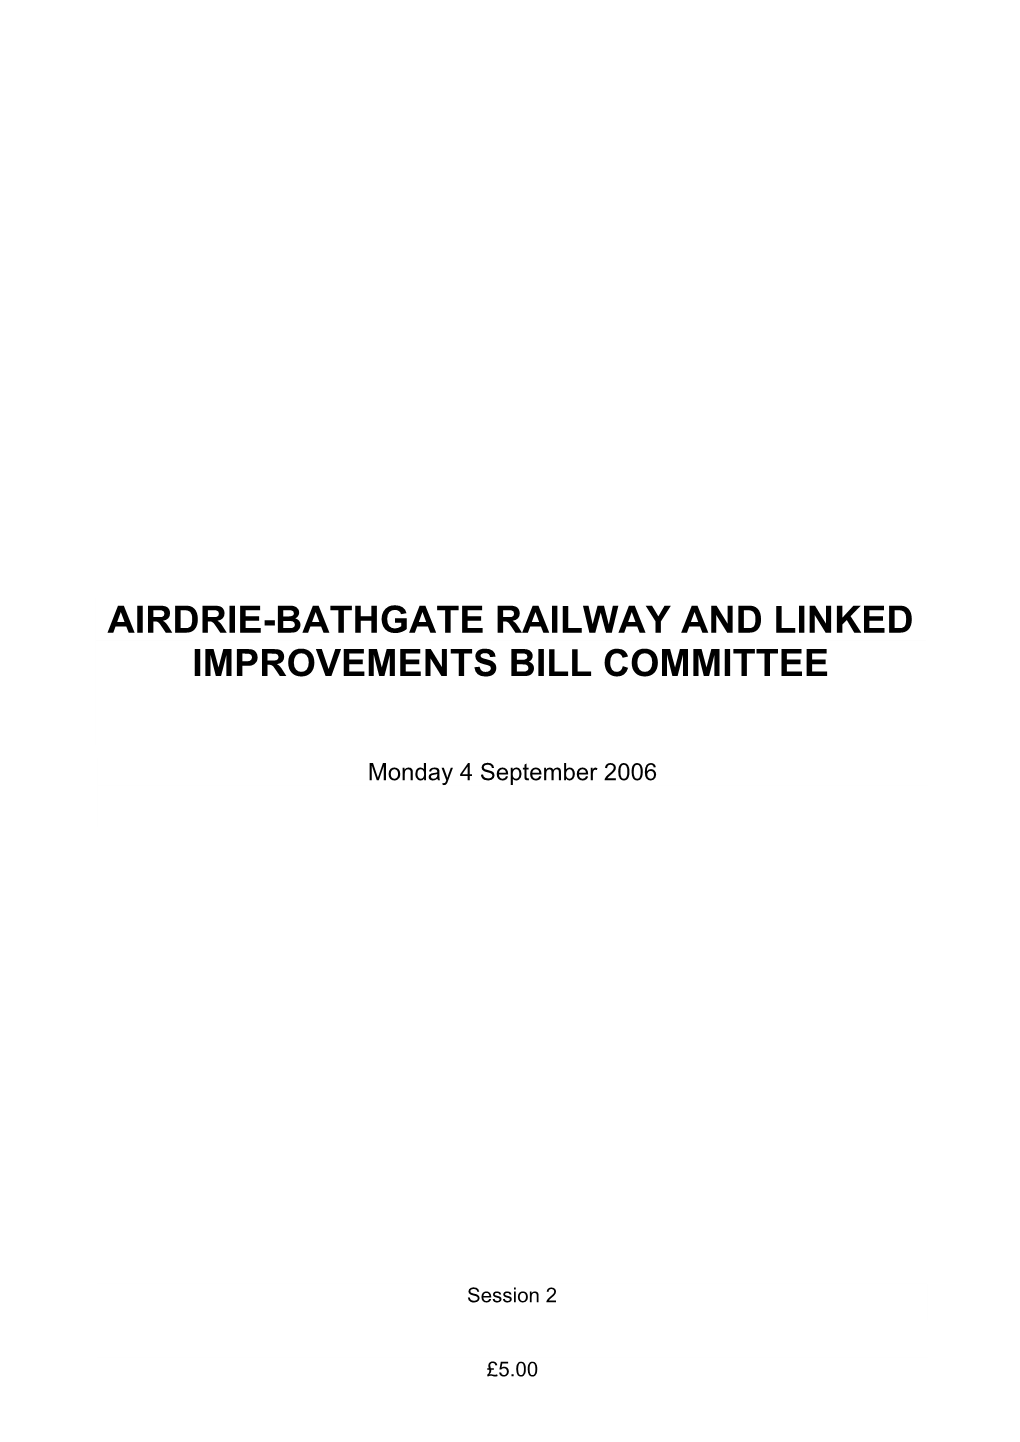 Airdrie-Bathgate Railway and Linked Improvements Bill Committee